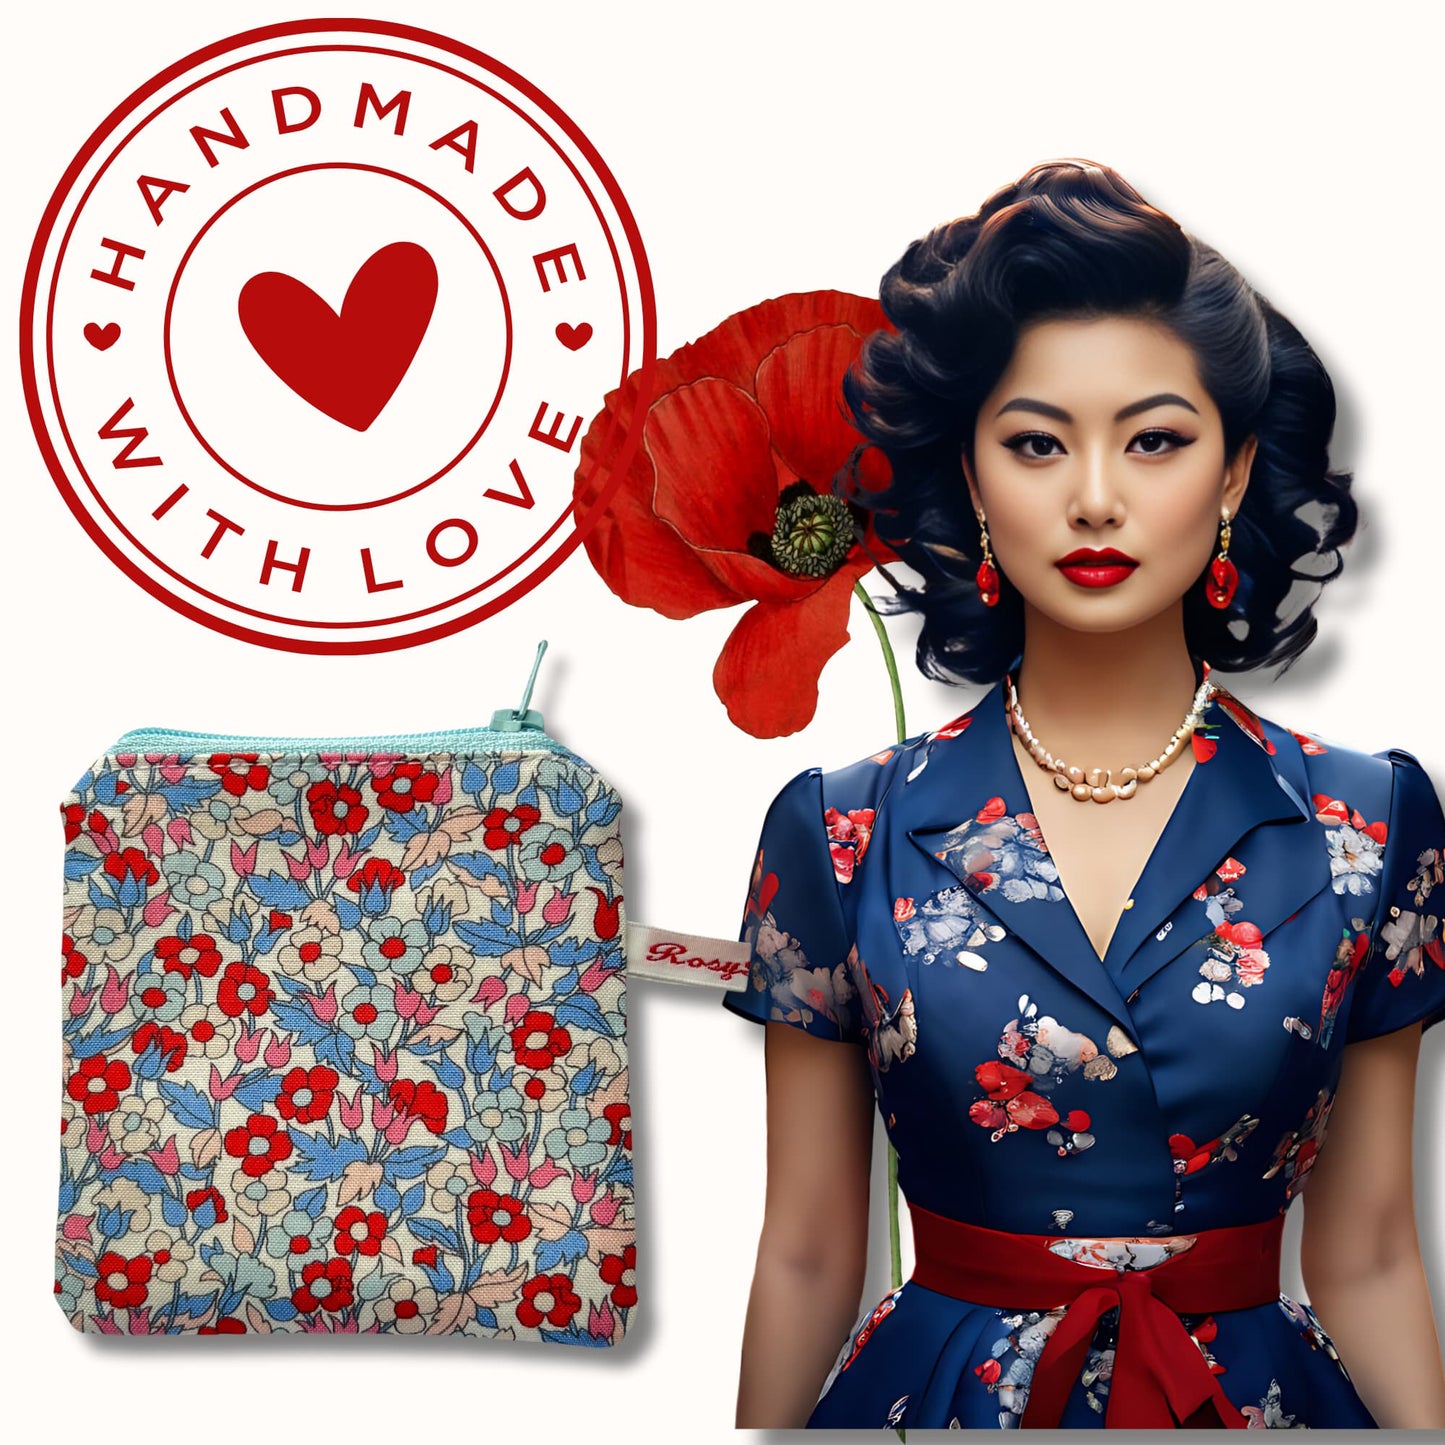 Liberty Fabric Purse -  Piccadilly Poppy from The Carnaby Collection